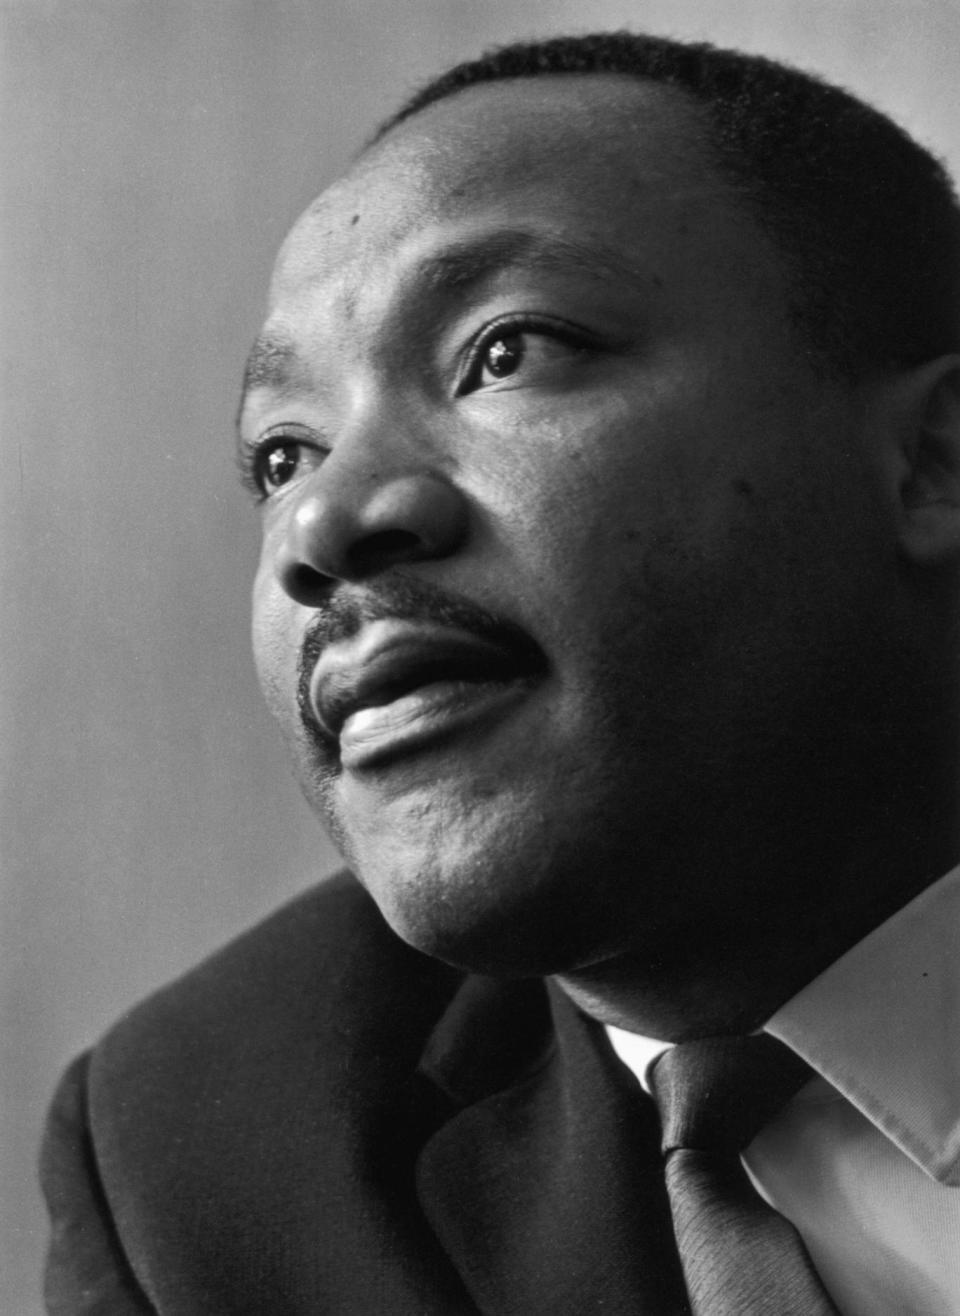 Martin Luther King Jnr in 1964 (Getty Images)